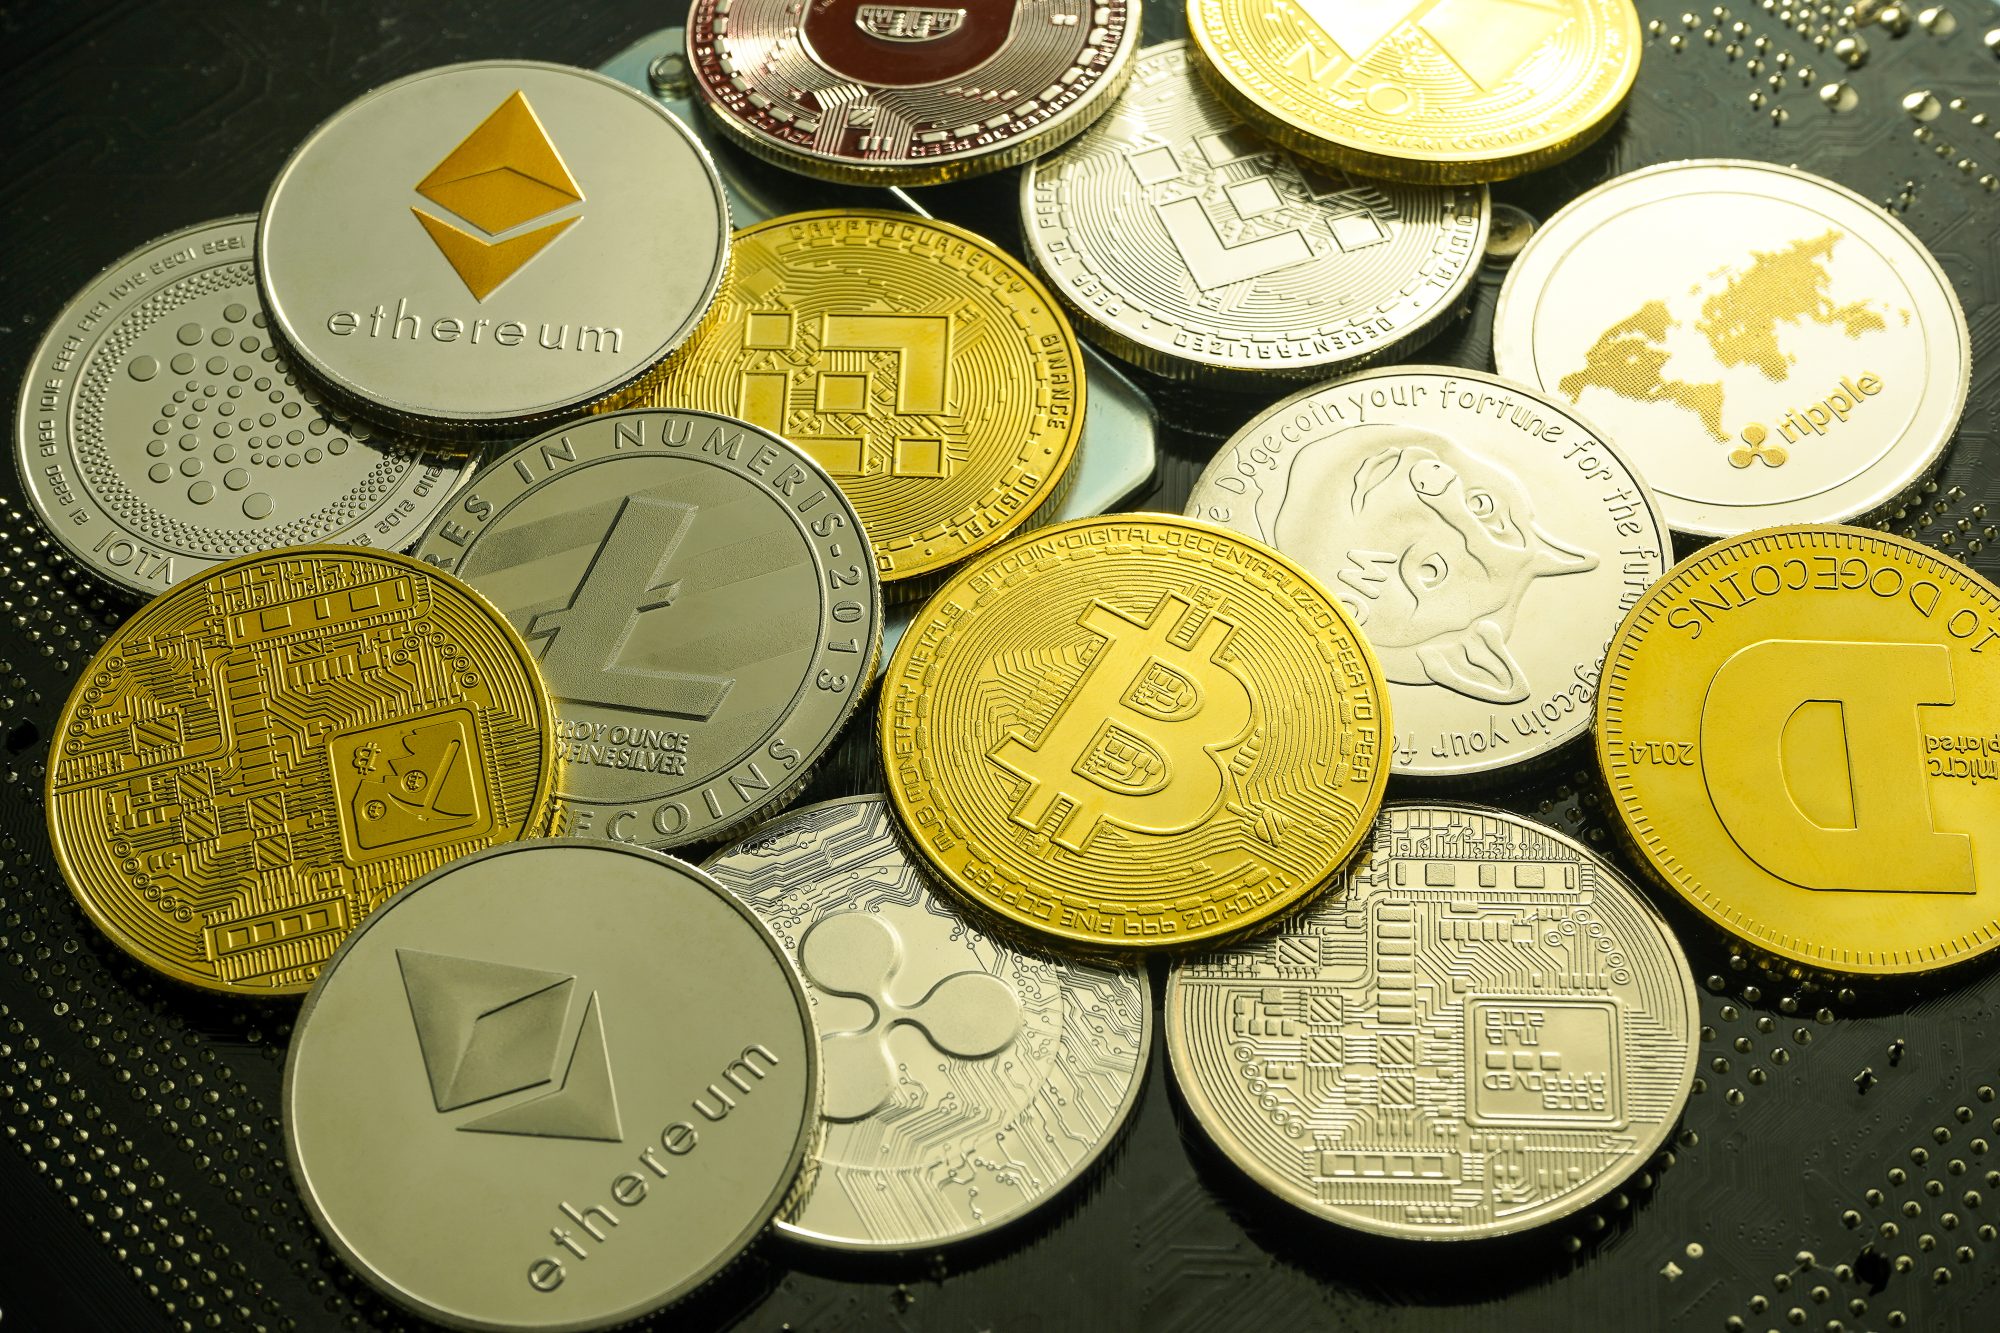 Gold coins representing different cryptocurrencies